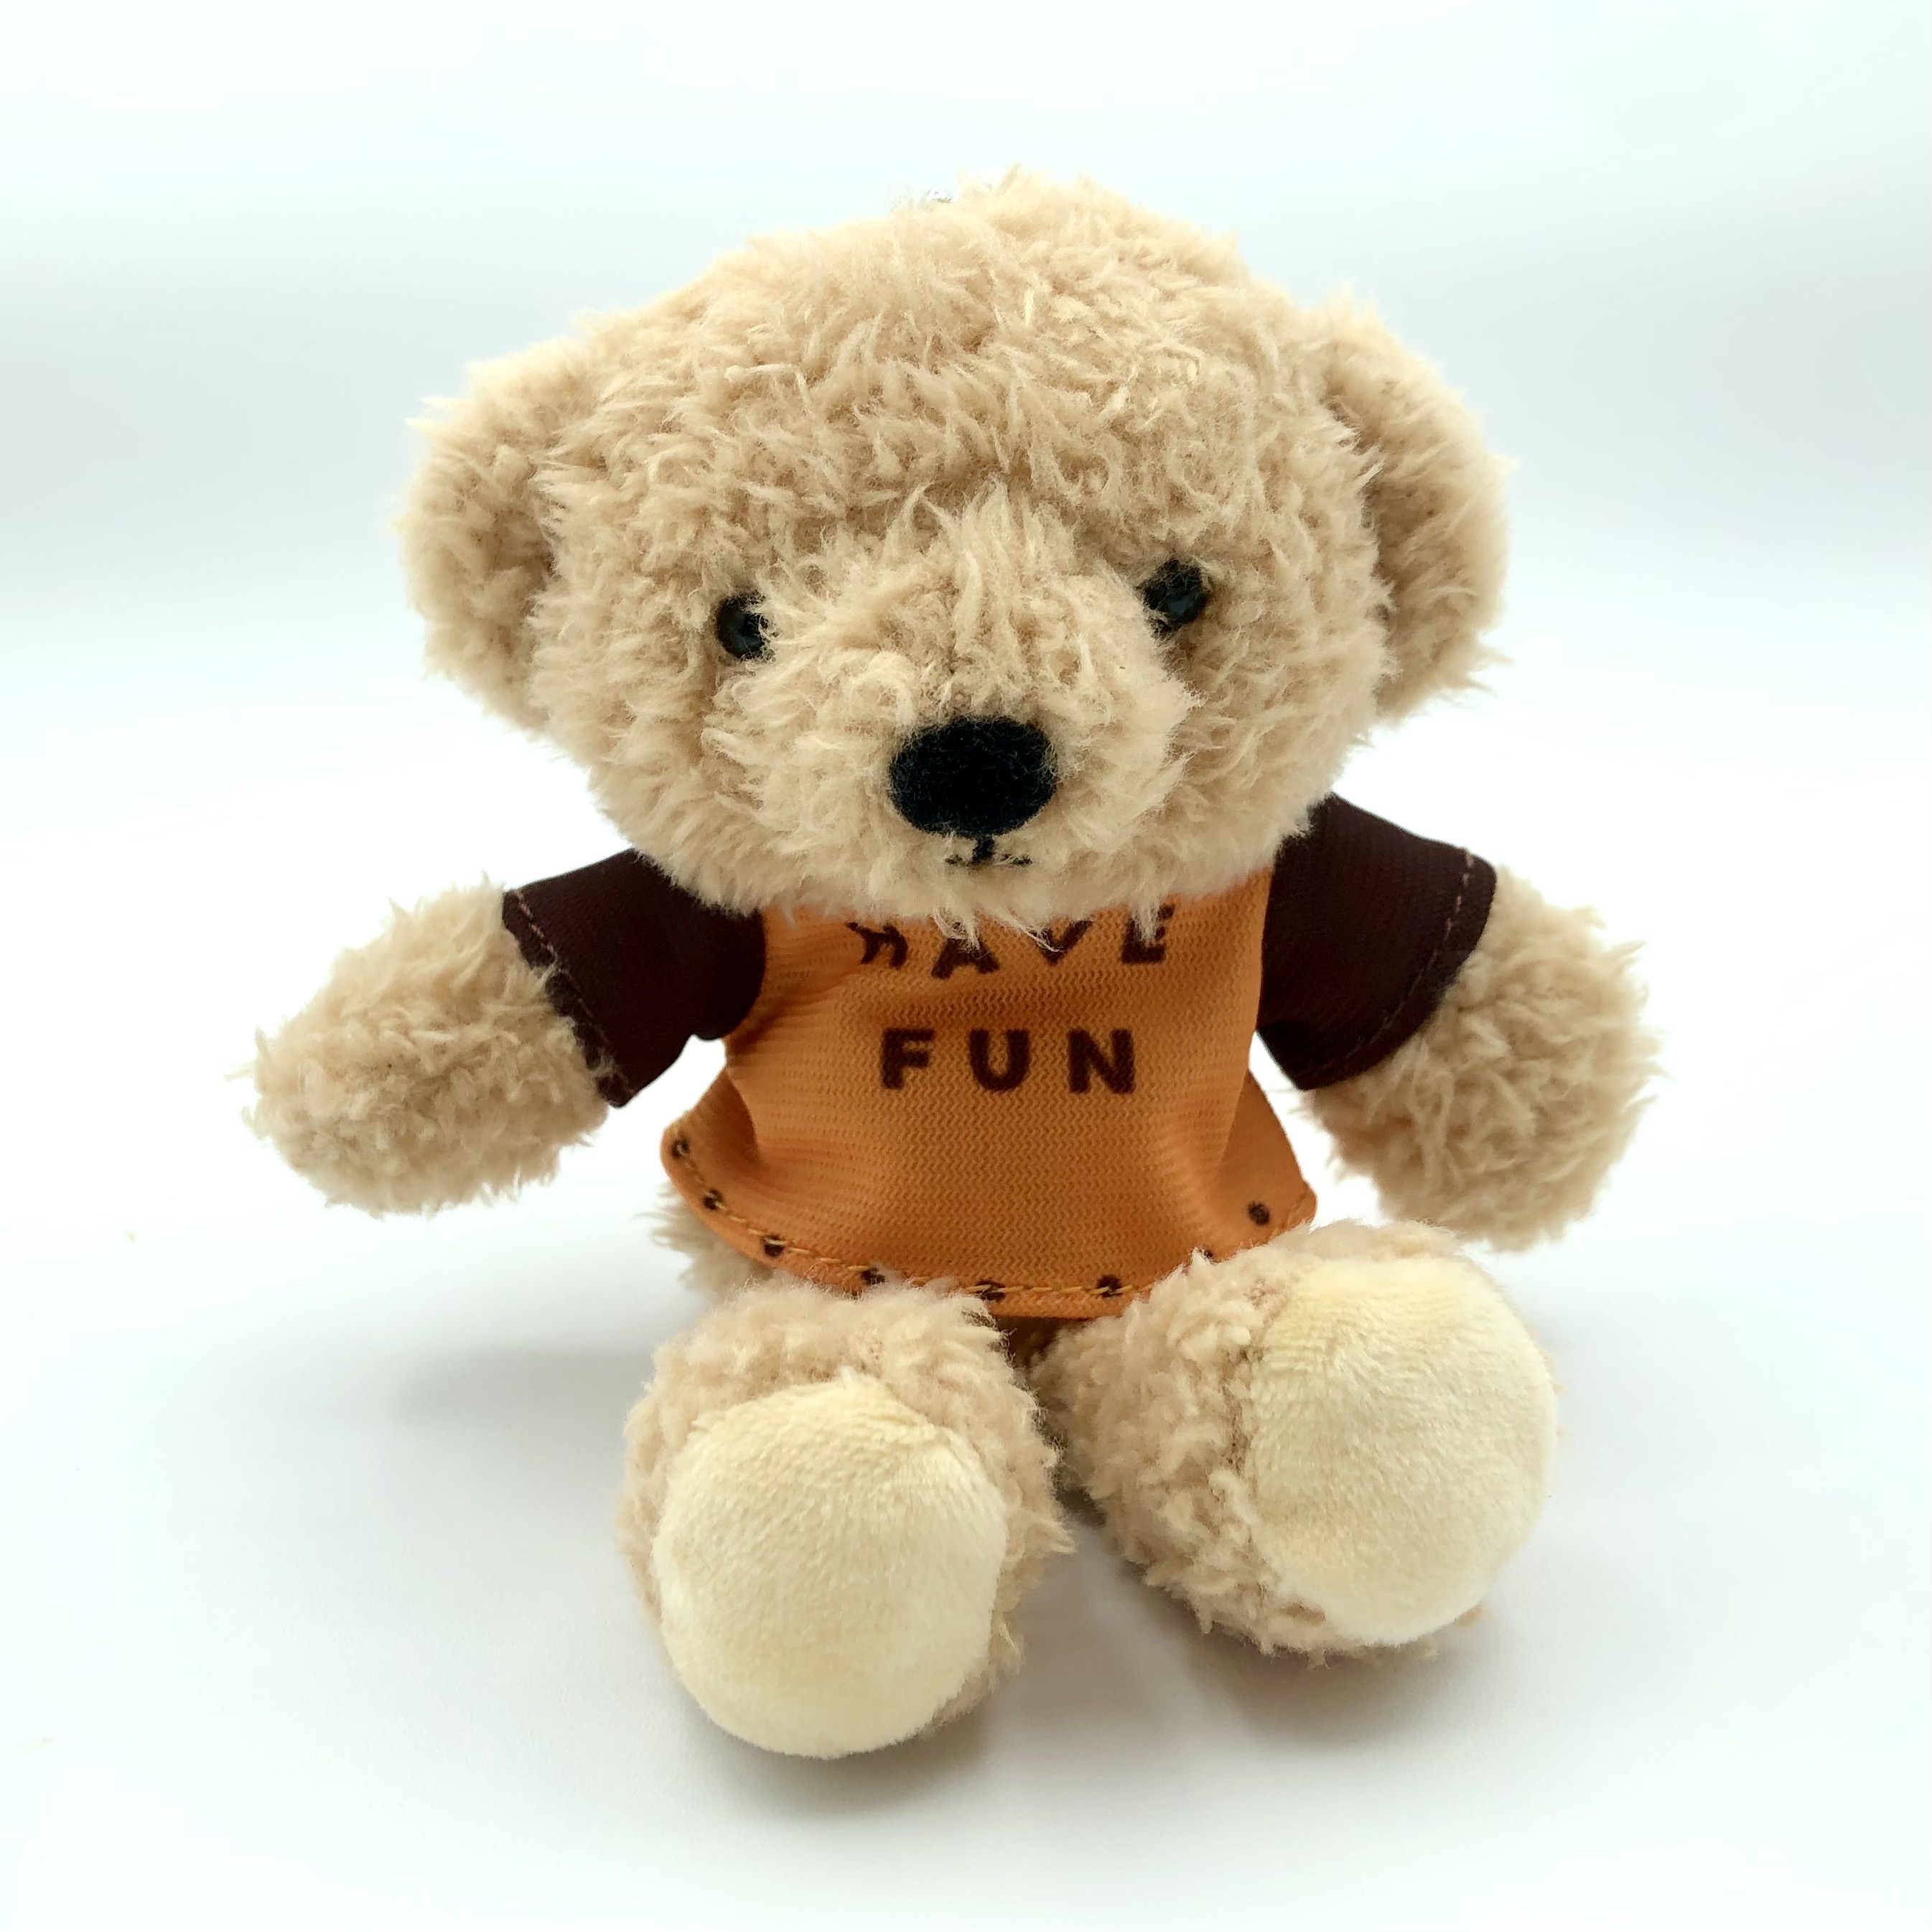 Stand by me bear SBMB004